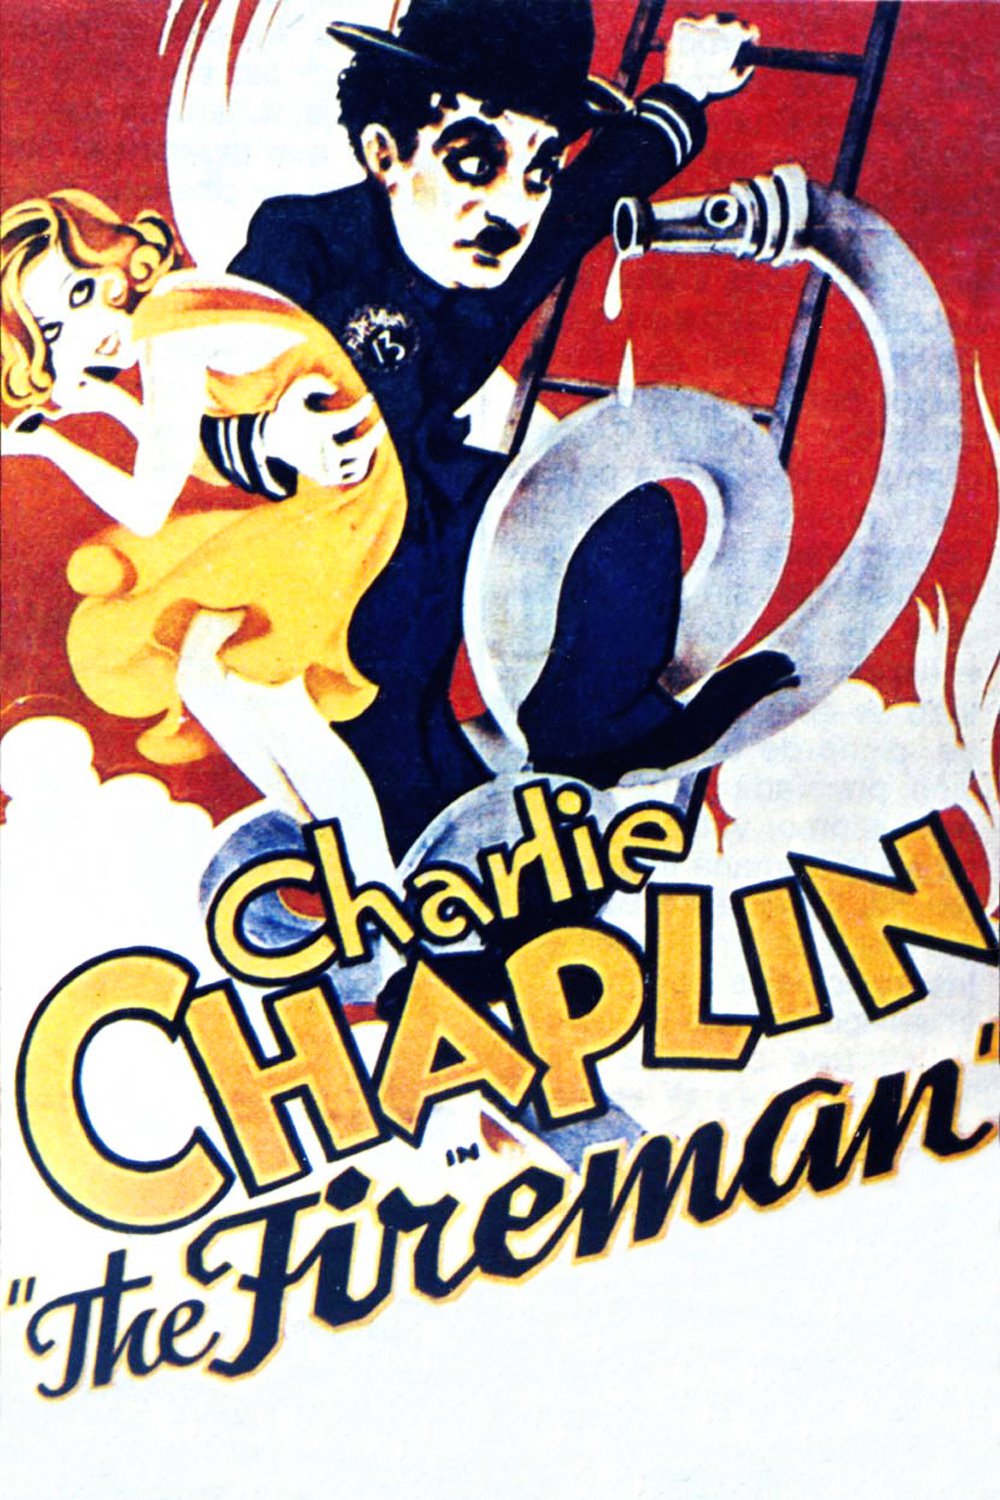 Poster for the movie "The Fireman"